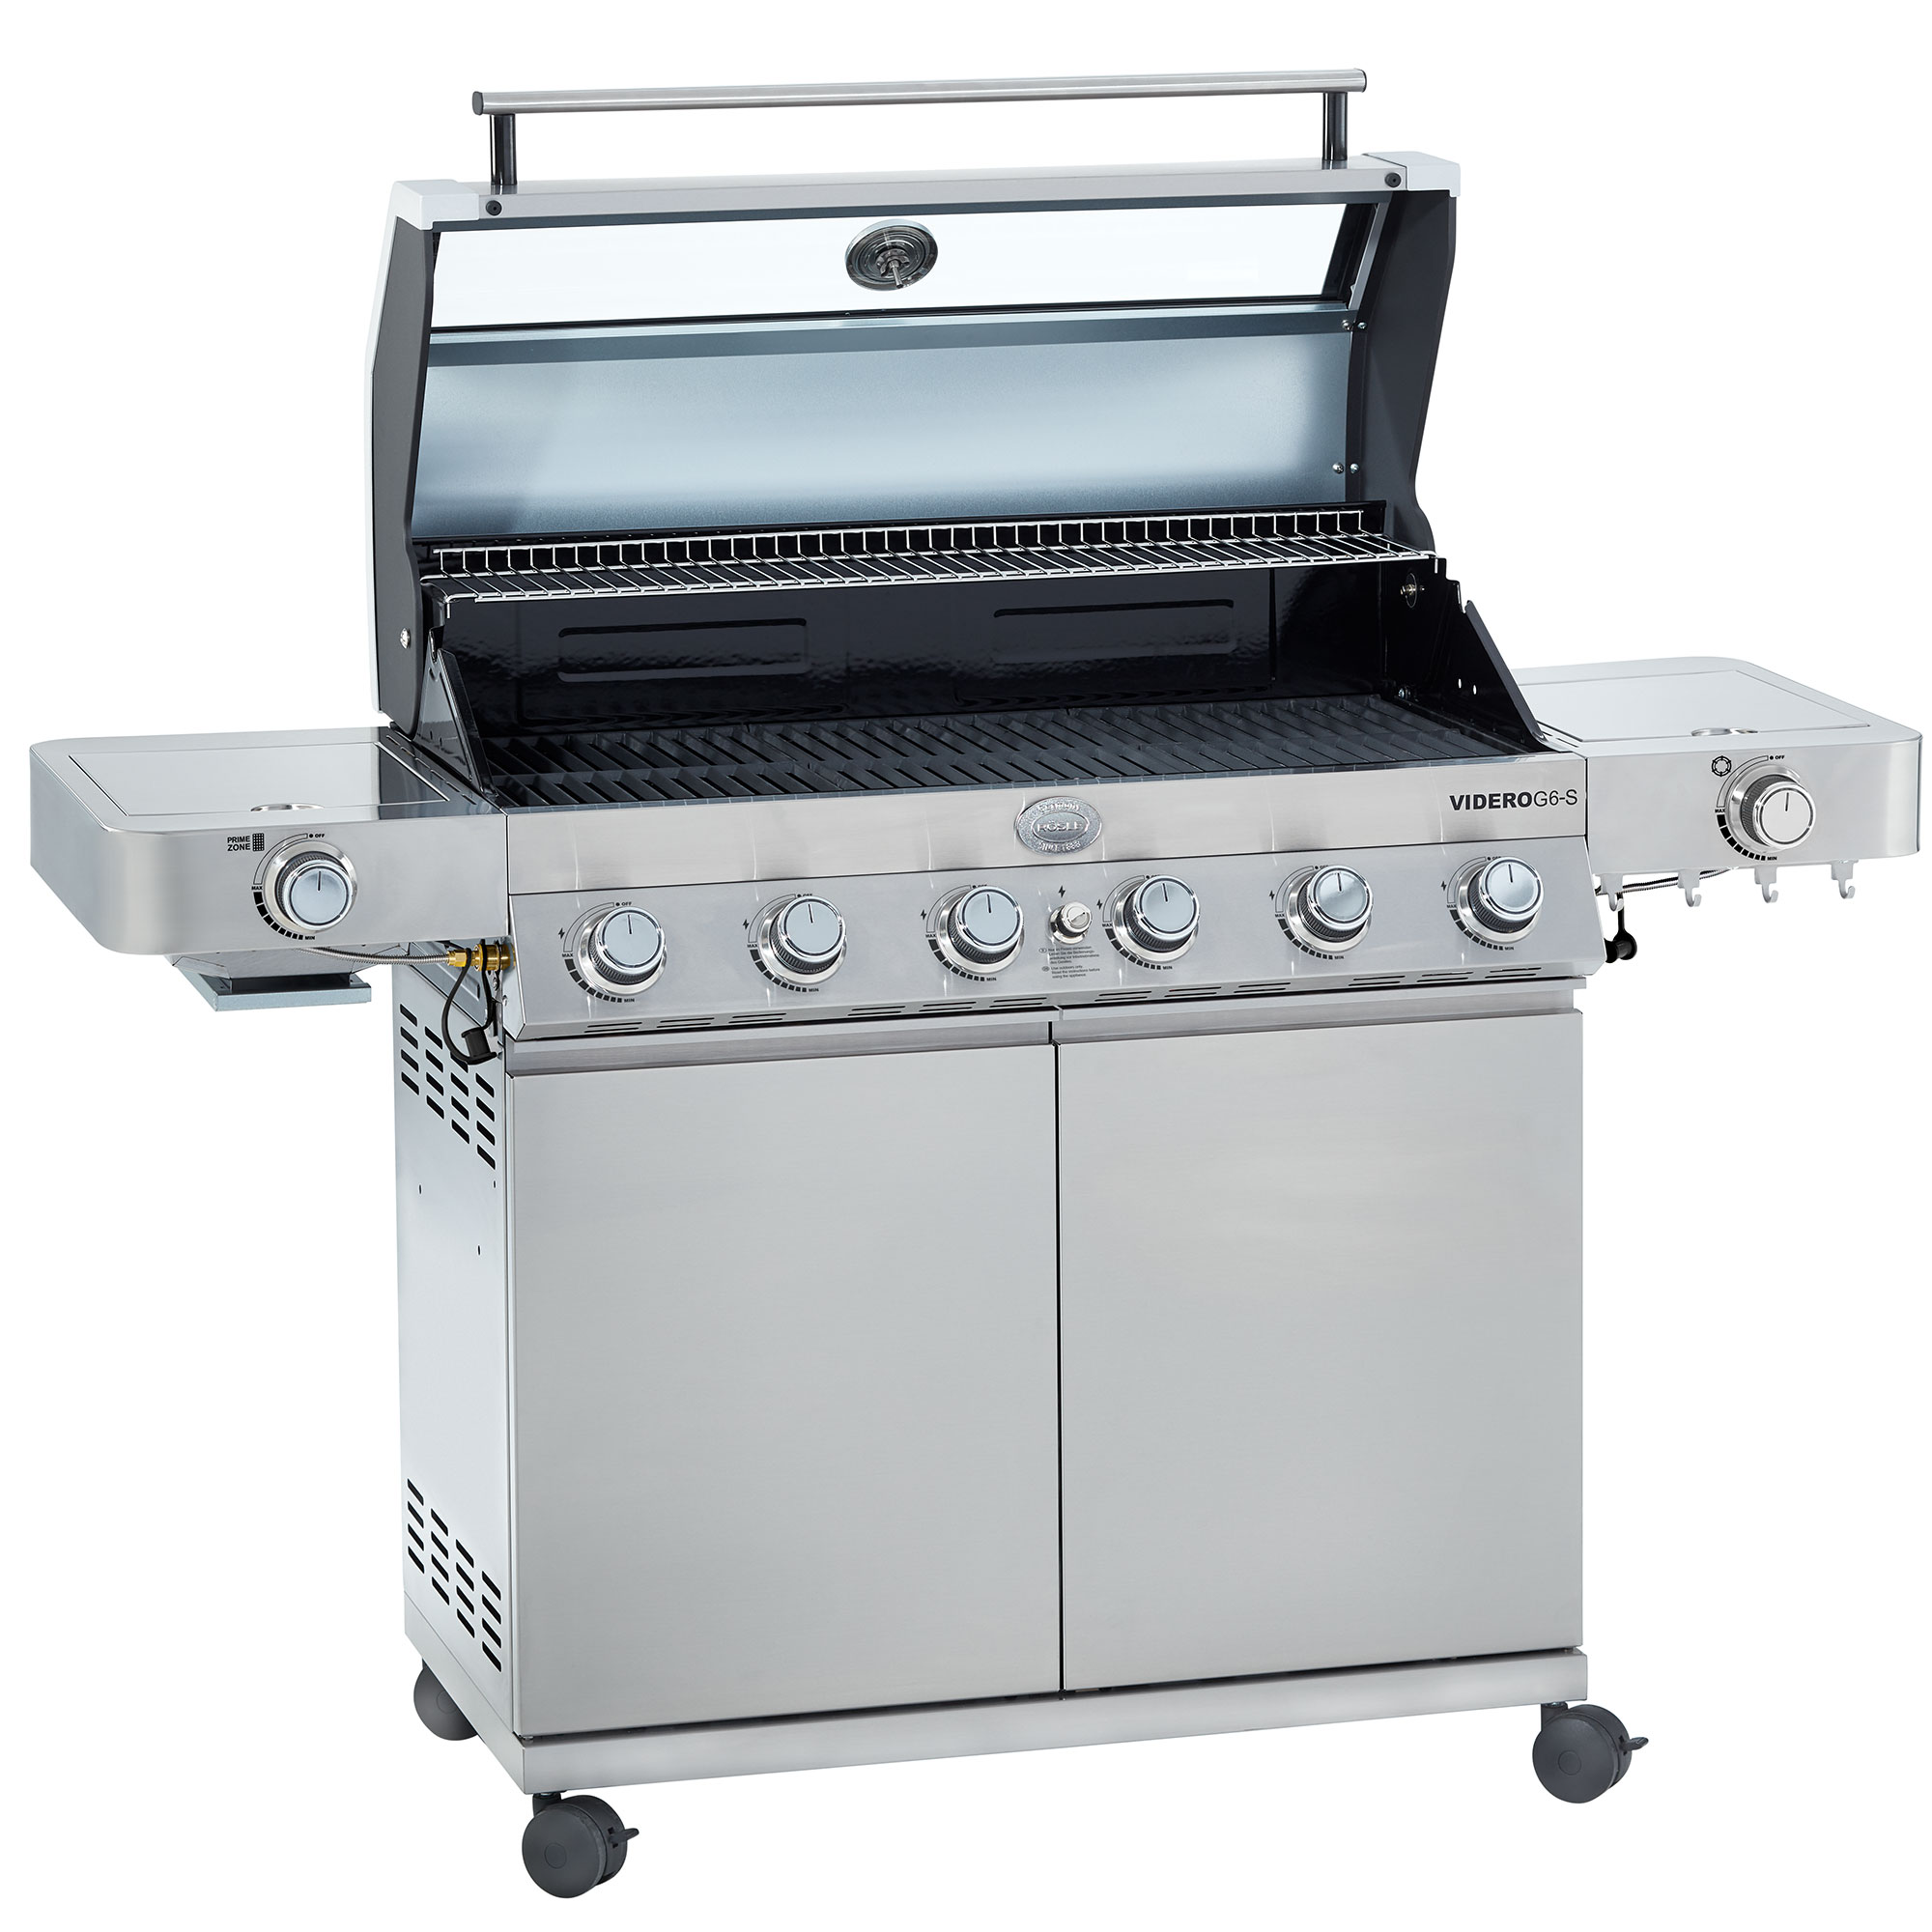 Gas Grill BBQ-Station VIDERO G6-S Vario+ Stainless steel 50 mbar, Exclusive at Grillfürst